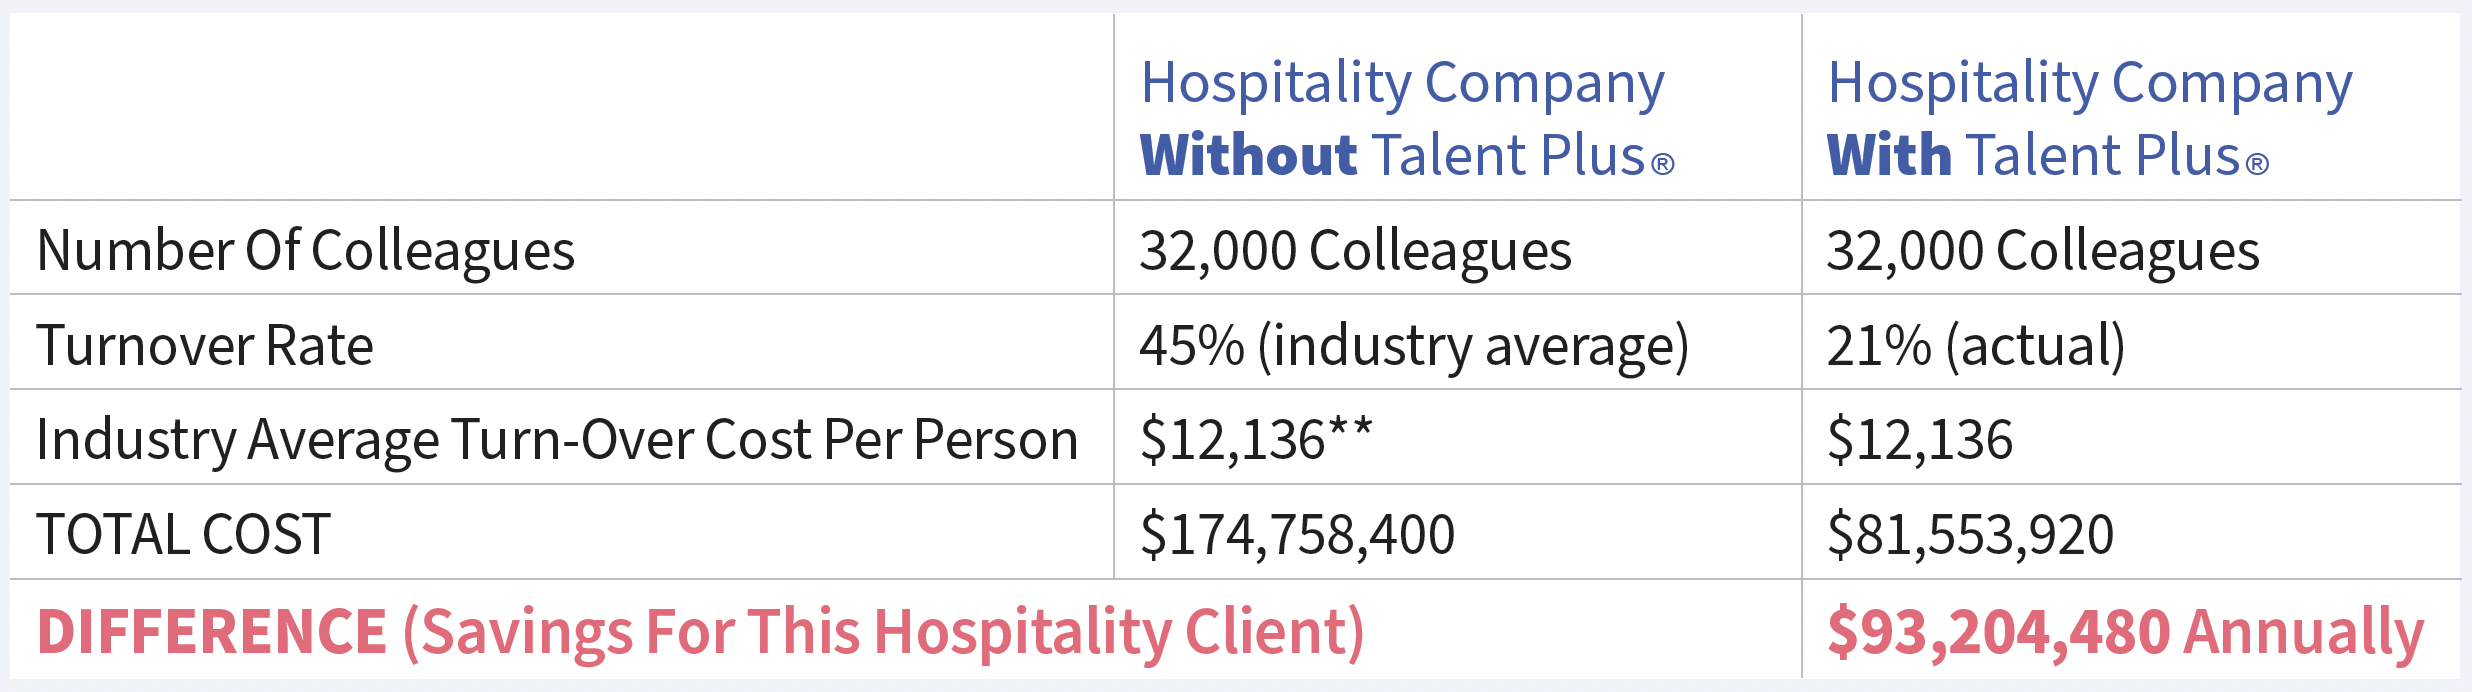 Difference Savings for This Hospitality Client